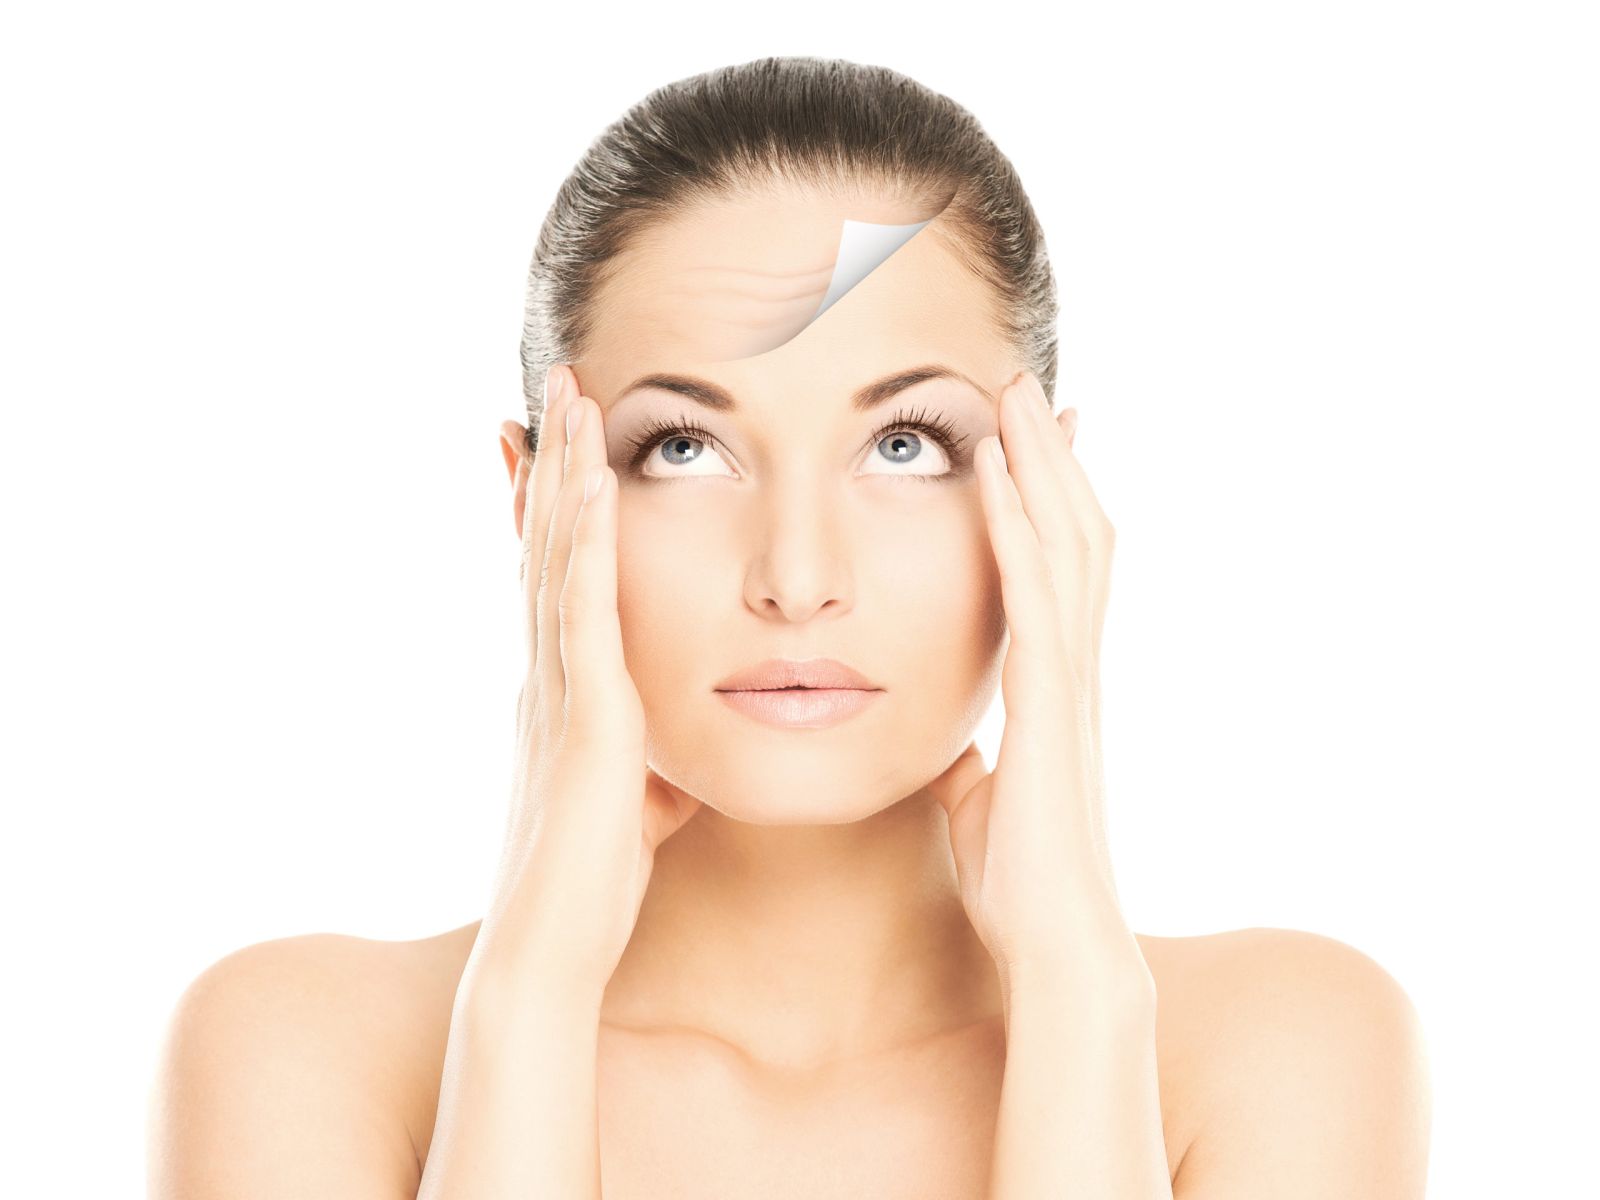 Botox® injections erase forehead wrinkles